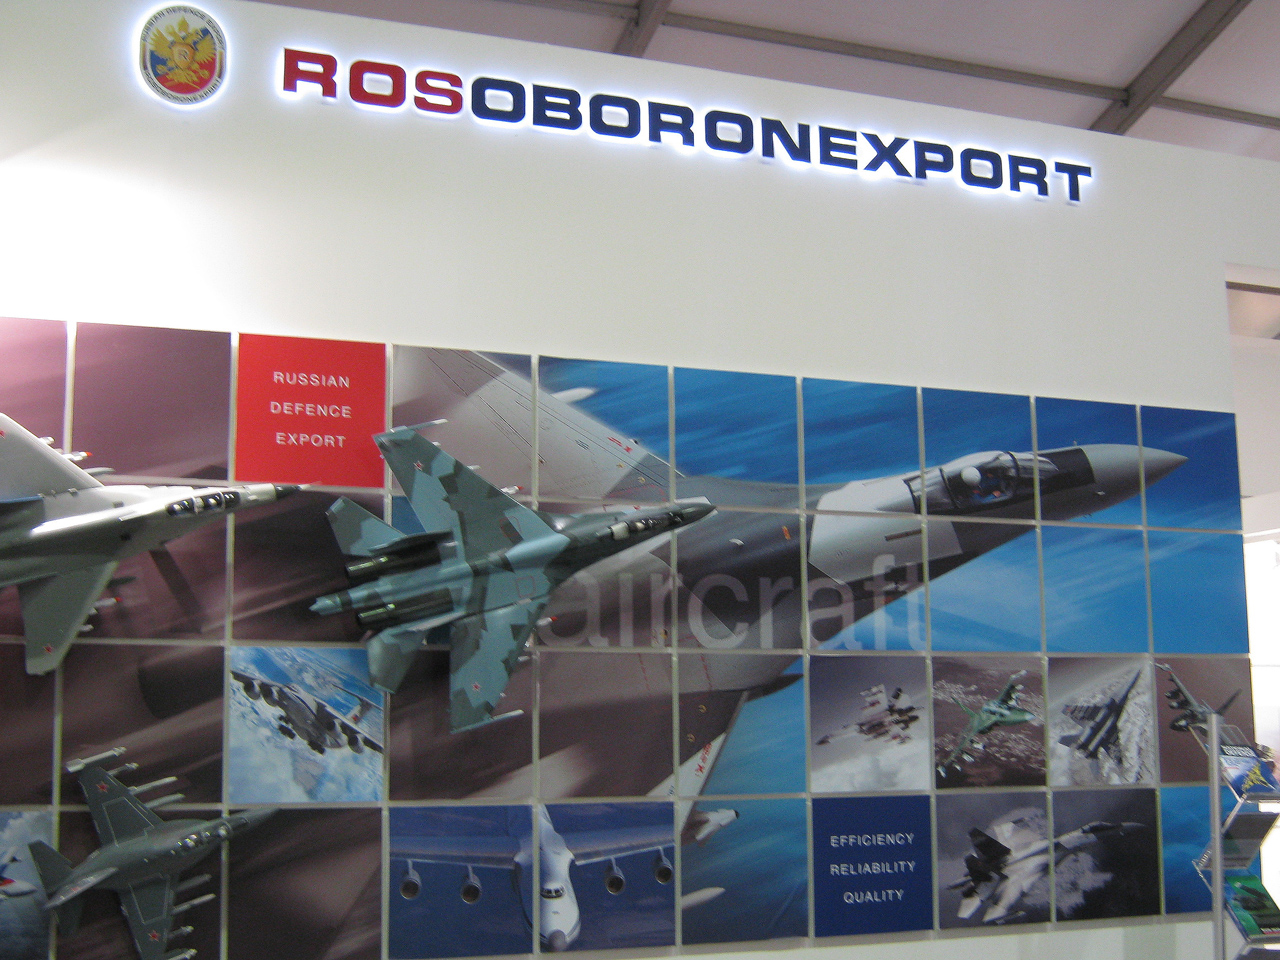 Rosoboronexport is going to participate in the Bahrain International Airshow in 2016